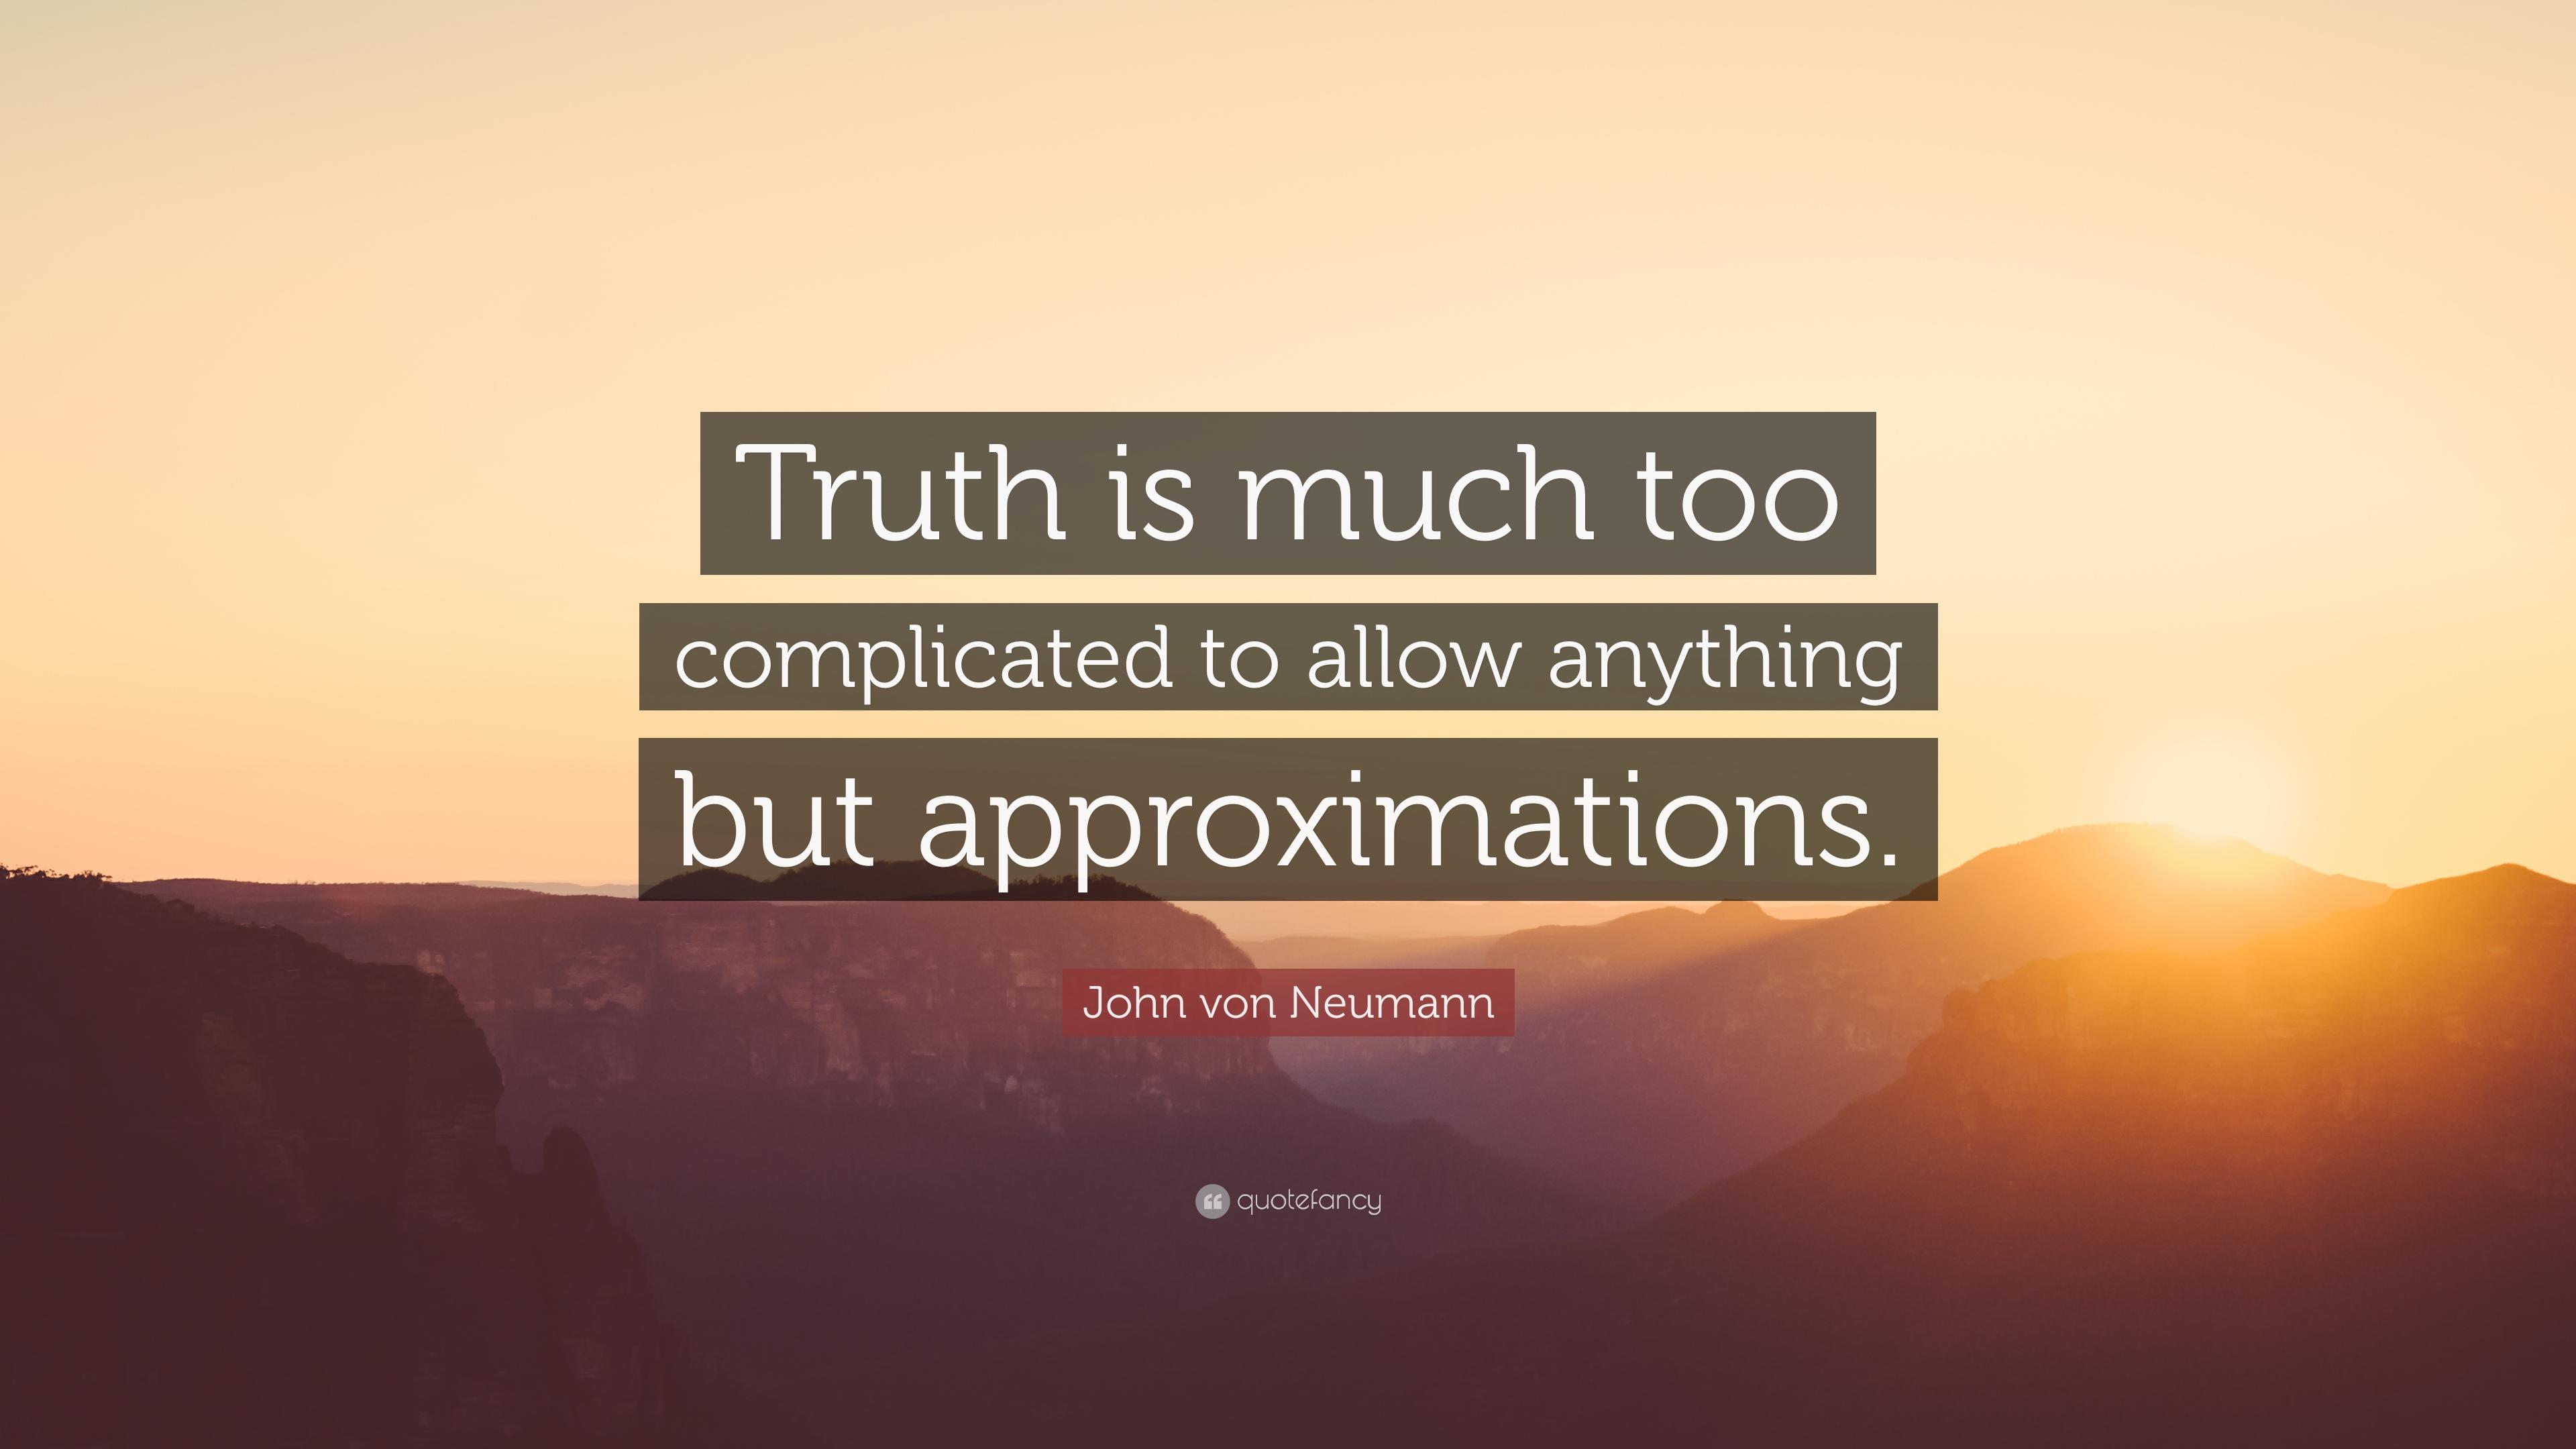 John von Neumann Quote: “Truth is much too complicated to allow